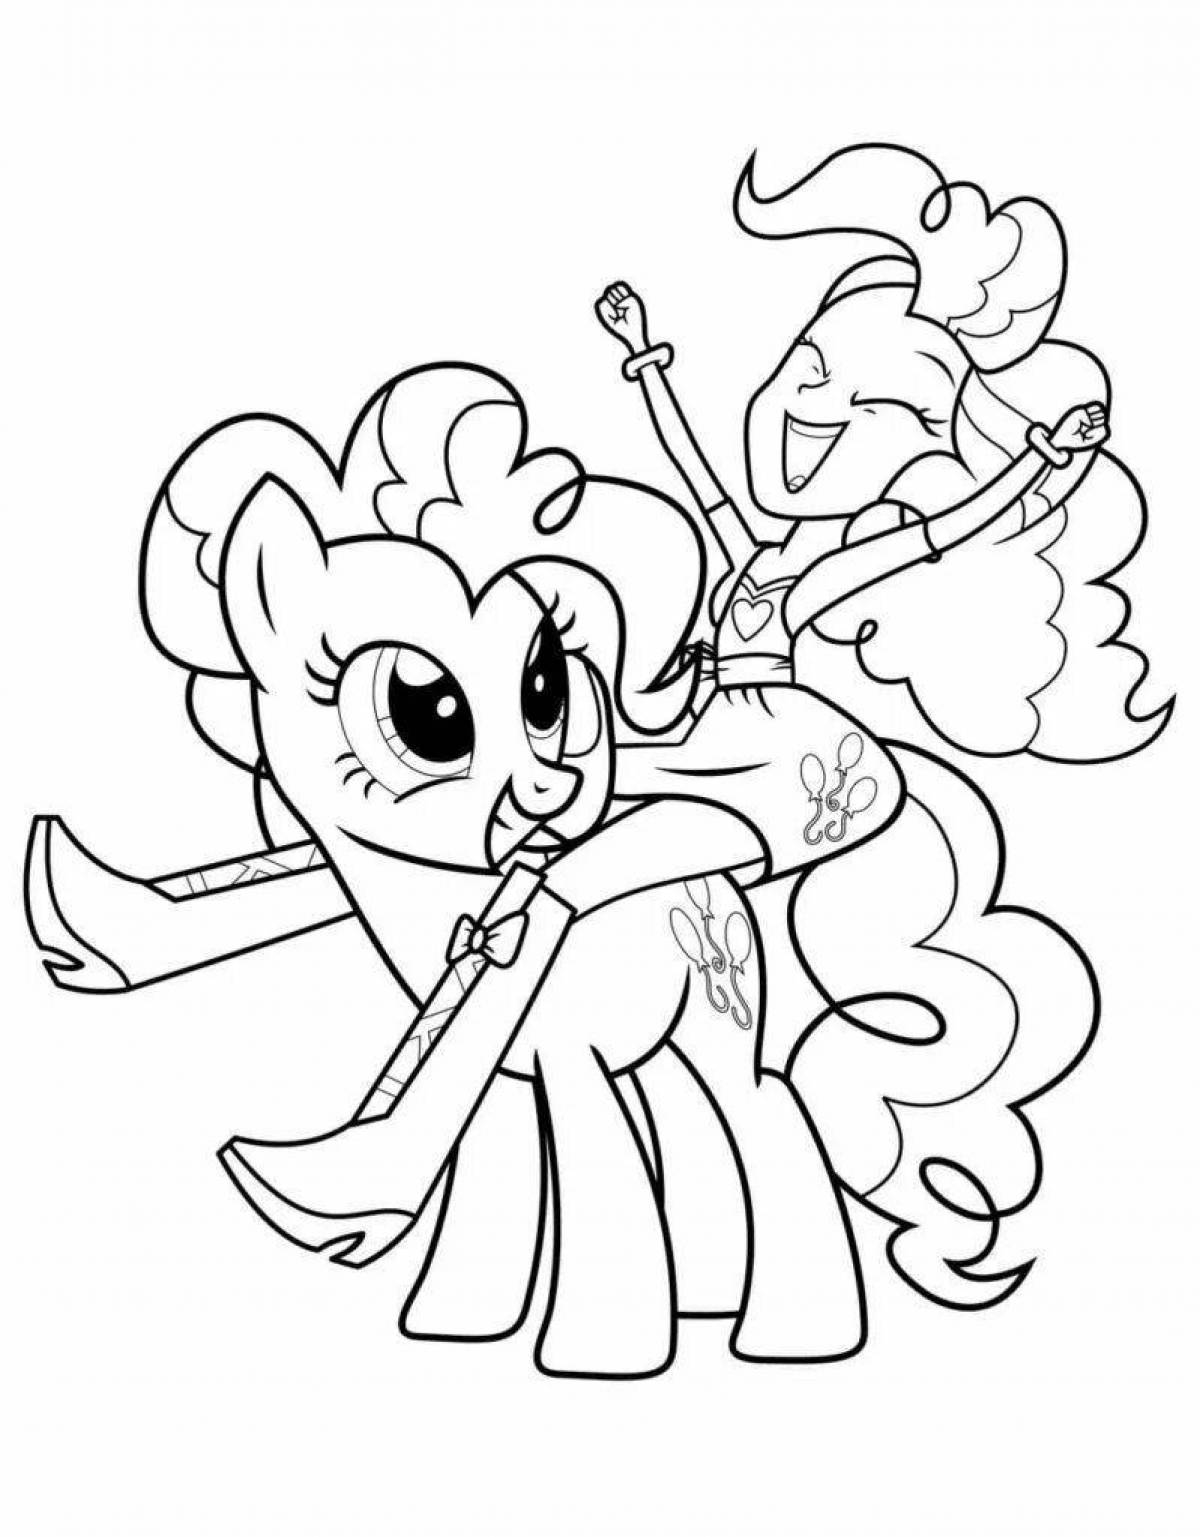 Coloring page happy pinkie pie